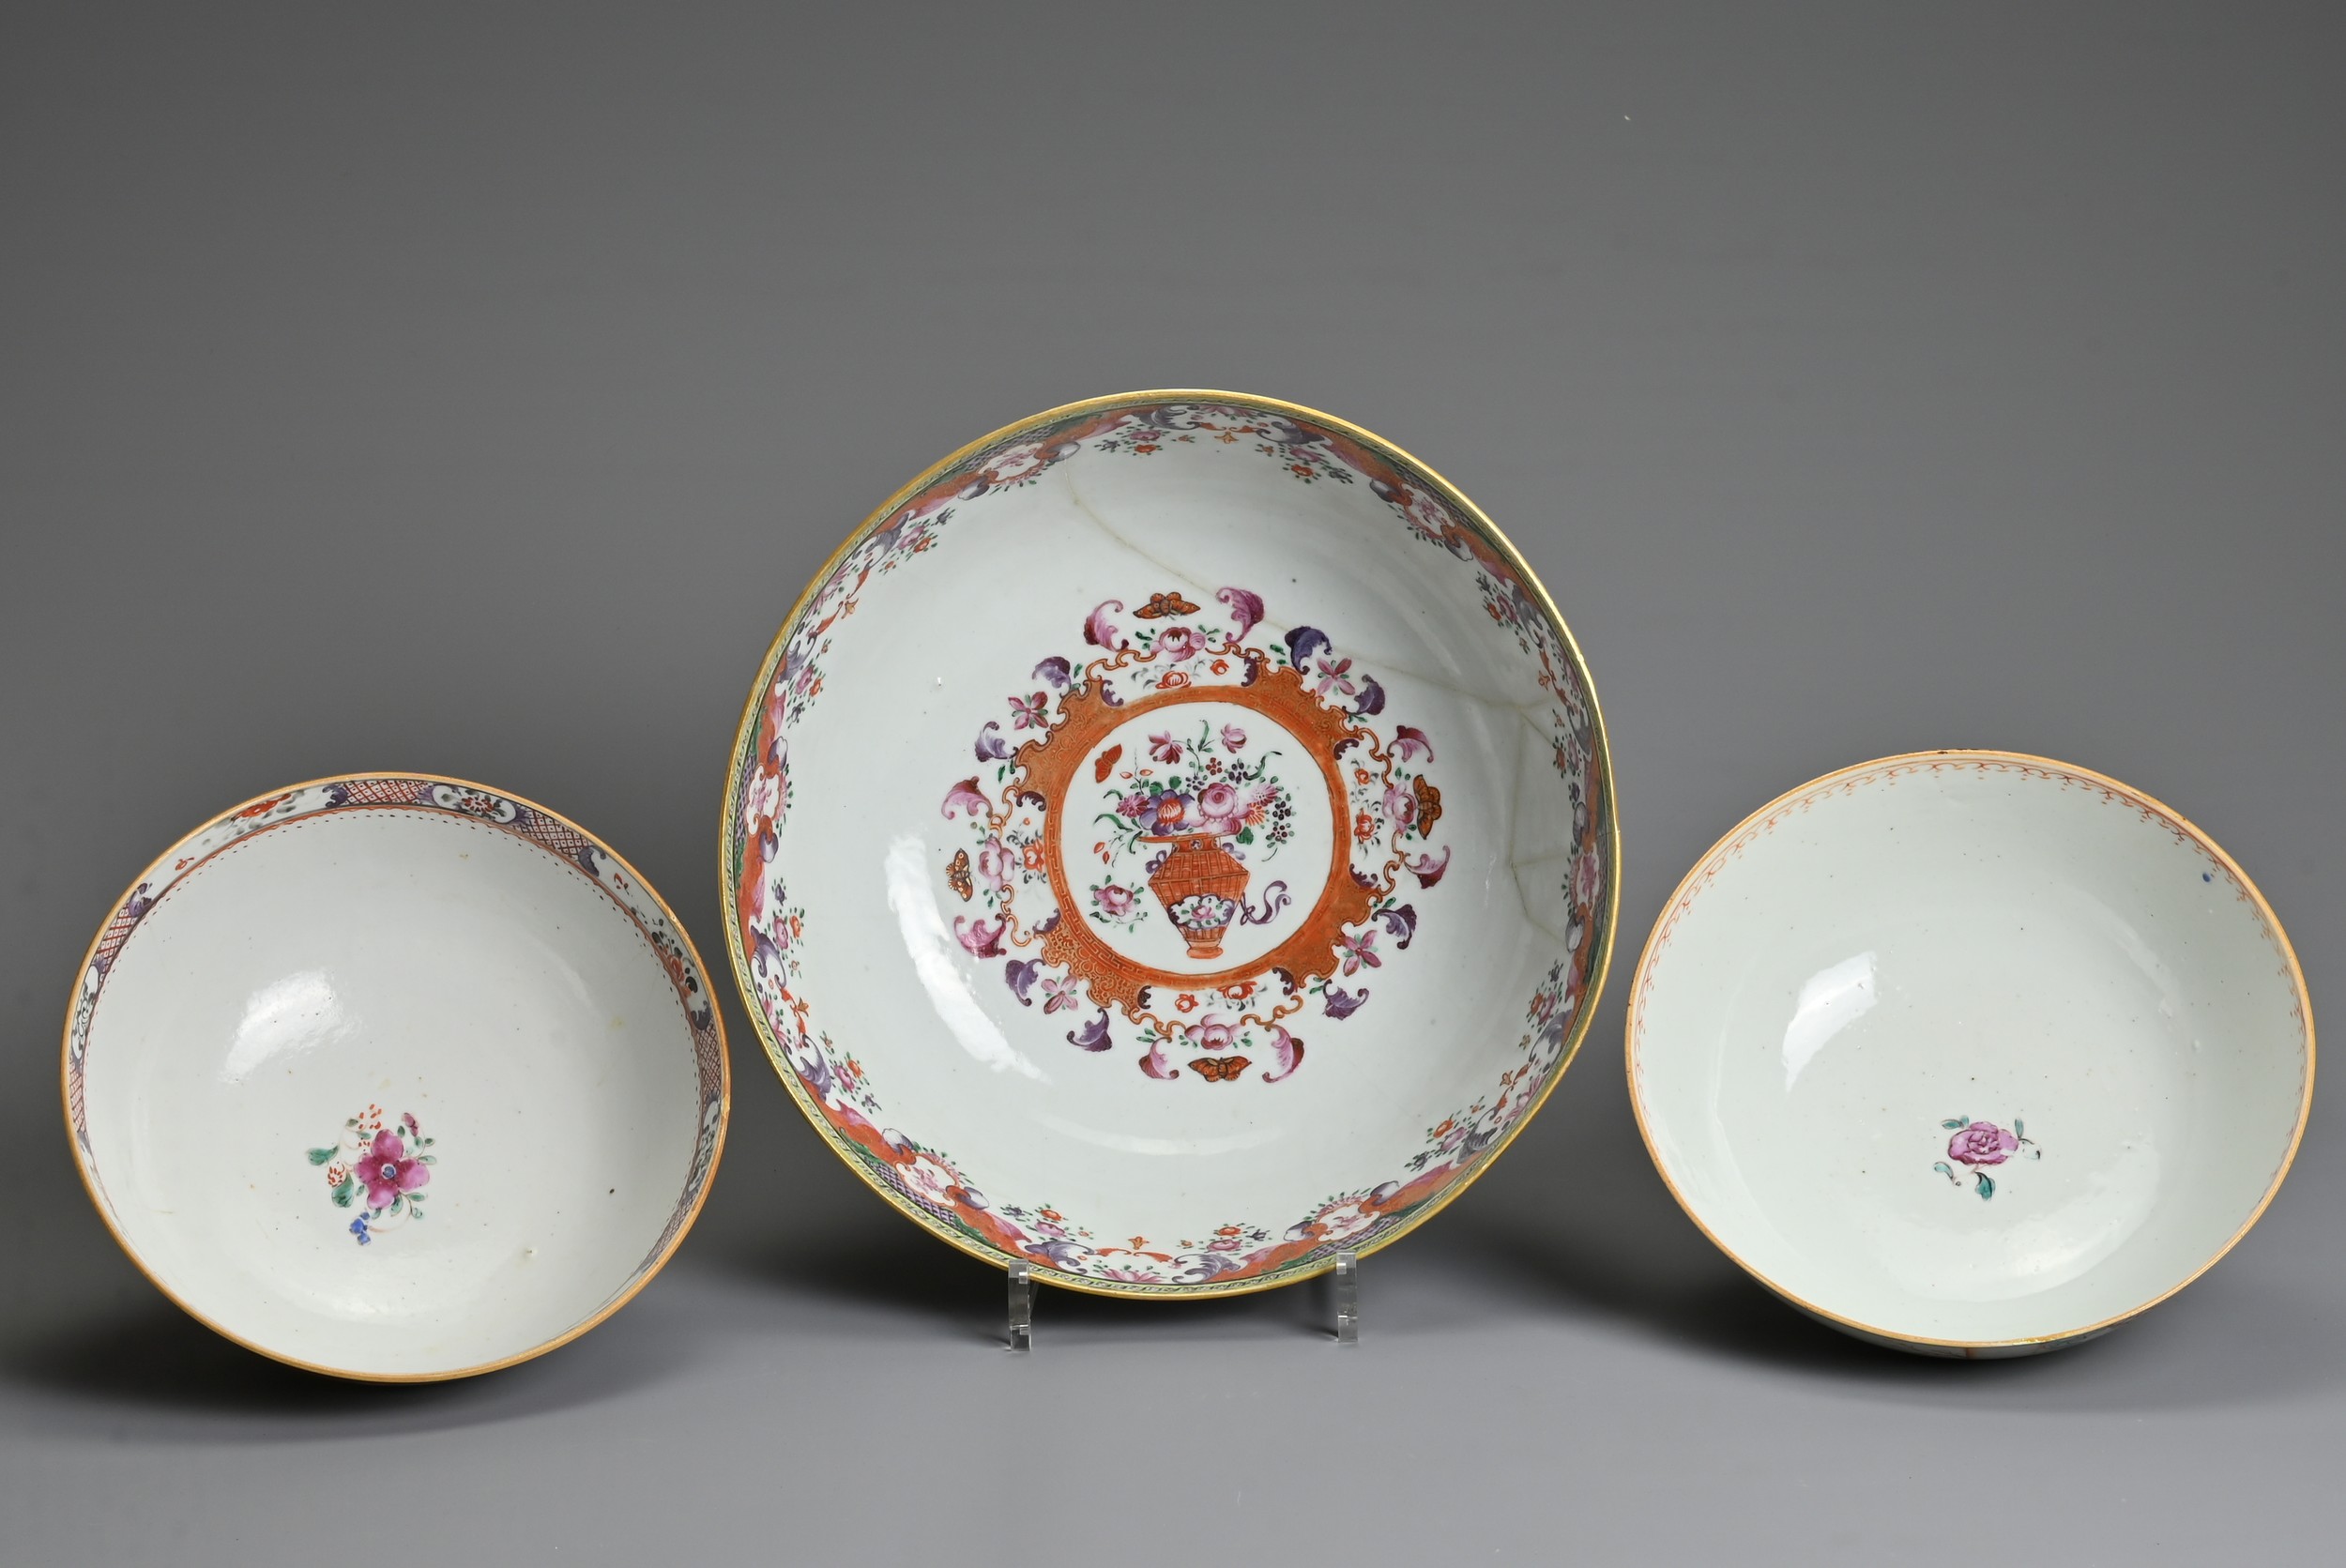 THREE CHINESE FAMILLE ROSE PORCELAIN BOWLS, 18TH CENTURY. Of graduating sizes decorated with various - Image 4 of 6